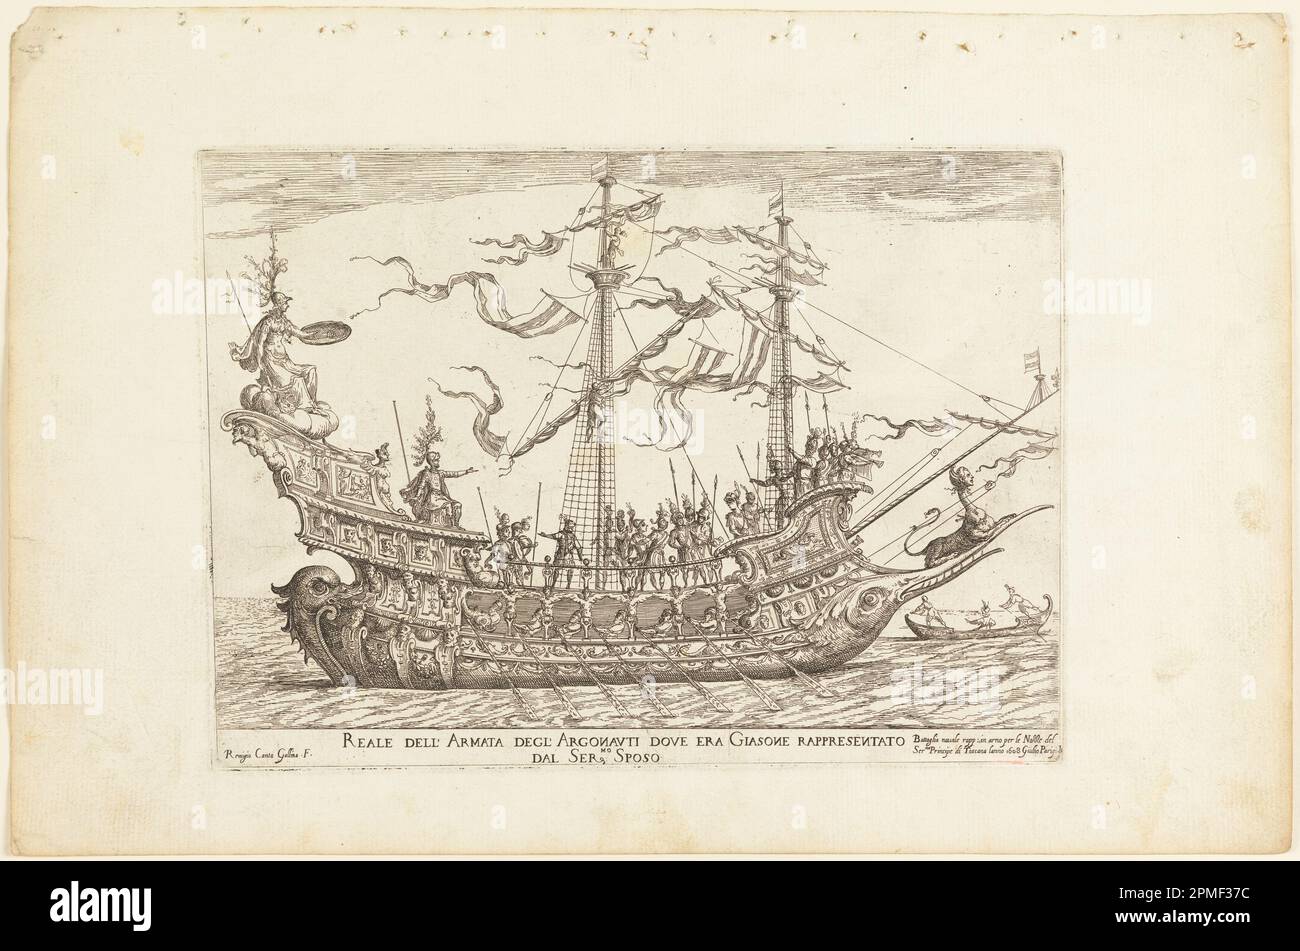 Print, From a Series of Naval Battles for Wedding Festivities of Cosimo Il de'Medici, Jason's Ship; Etched by Remigio Cantagallina (Italian, ca. 1582–1656); After Giulio Parigi (Italian, 1571–1635); Patron: Cosimo II de' Medici (Italian, 1590 – 1621); Italy; etching on paper; 26.8 x 40.7 cm (10 9/16 in. x 16 in.) Platemark: 19.5 x 27 cm (7 11/16 x 10 5/8 in.) Stock Photo